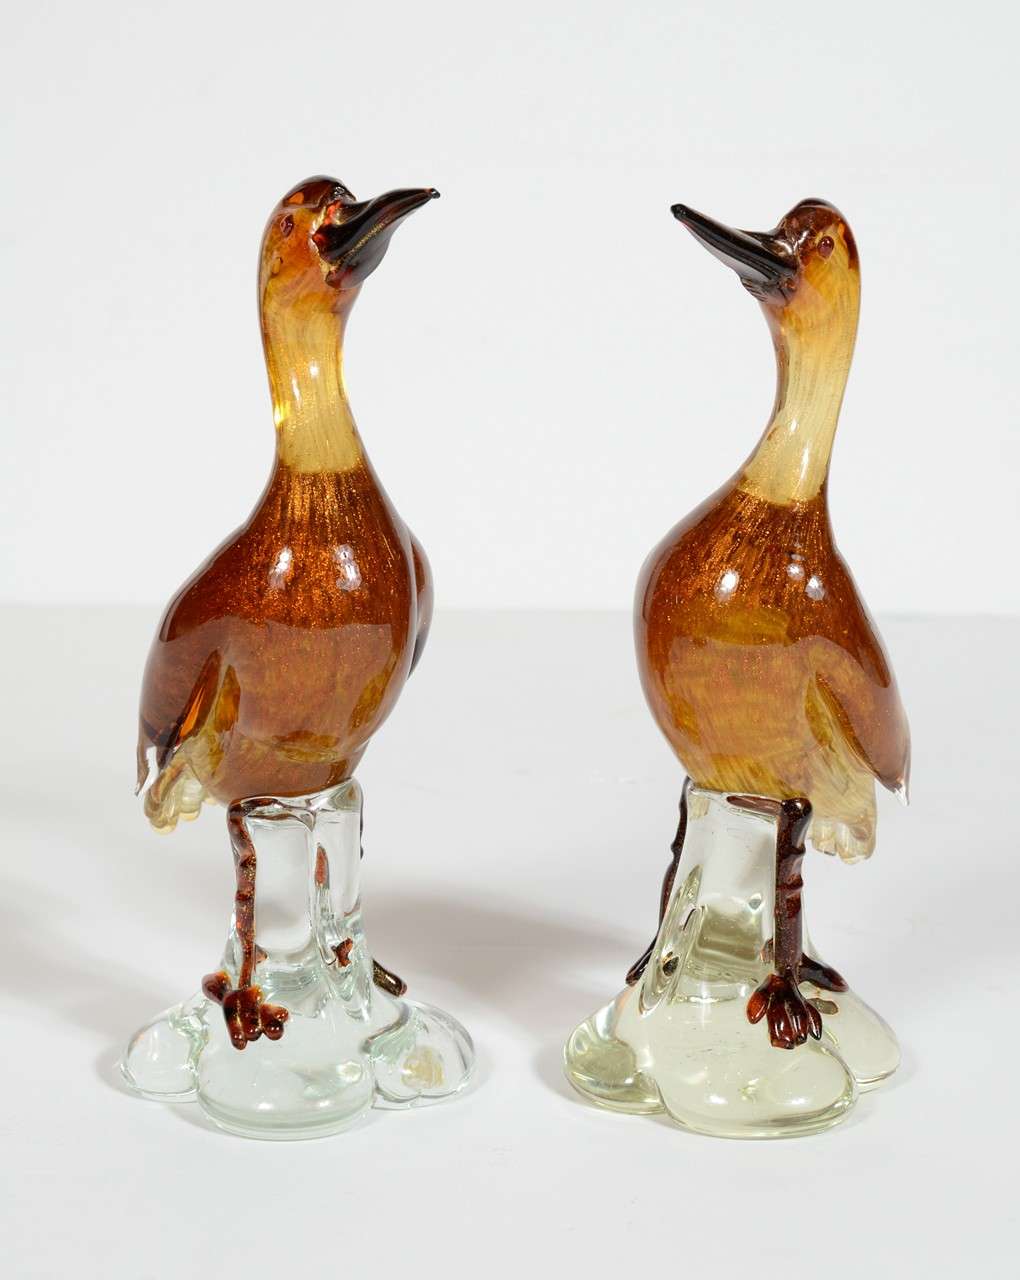 This pair of Mid-Century Modernist handblown Murano sculptures represent two birds, apparently cormorants, in stunning handblown glass replete with gold dust and affixed to a clear base. These would be perfect for a beach house, actually any house,